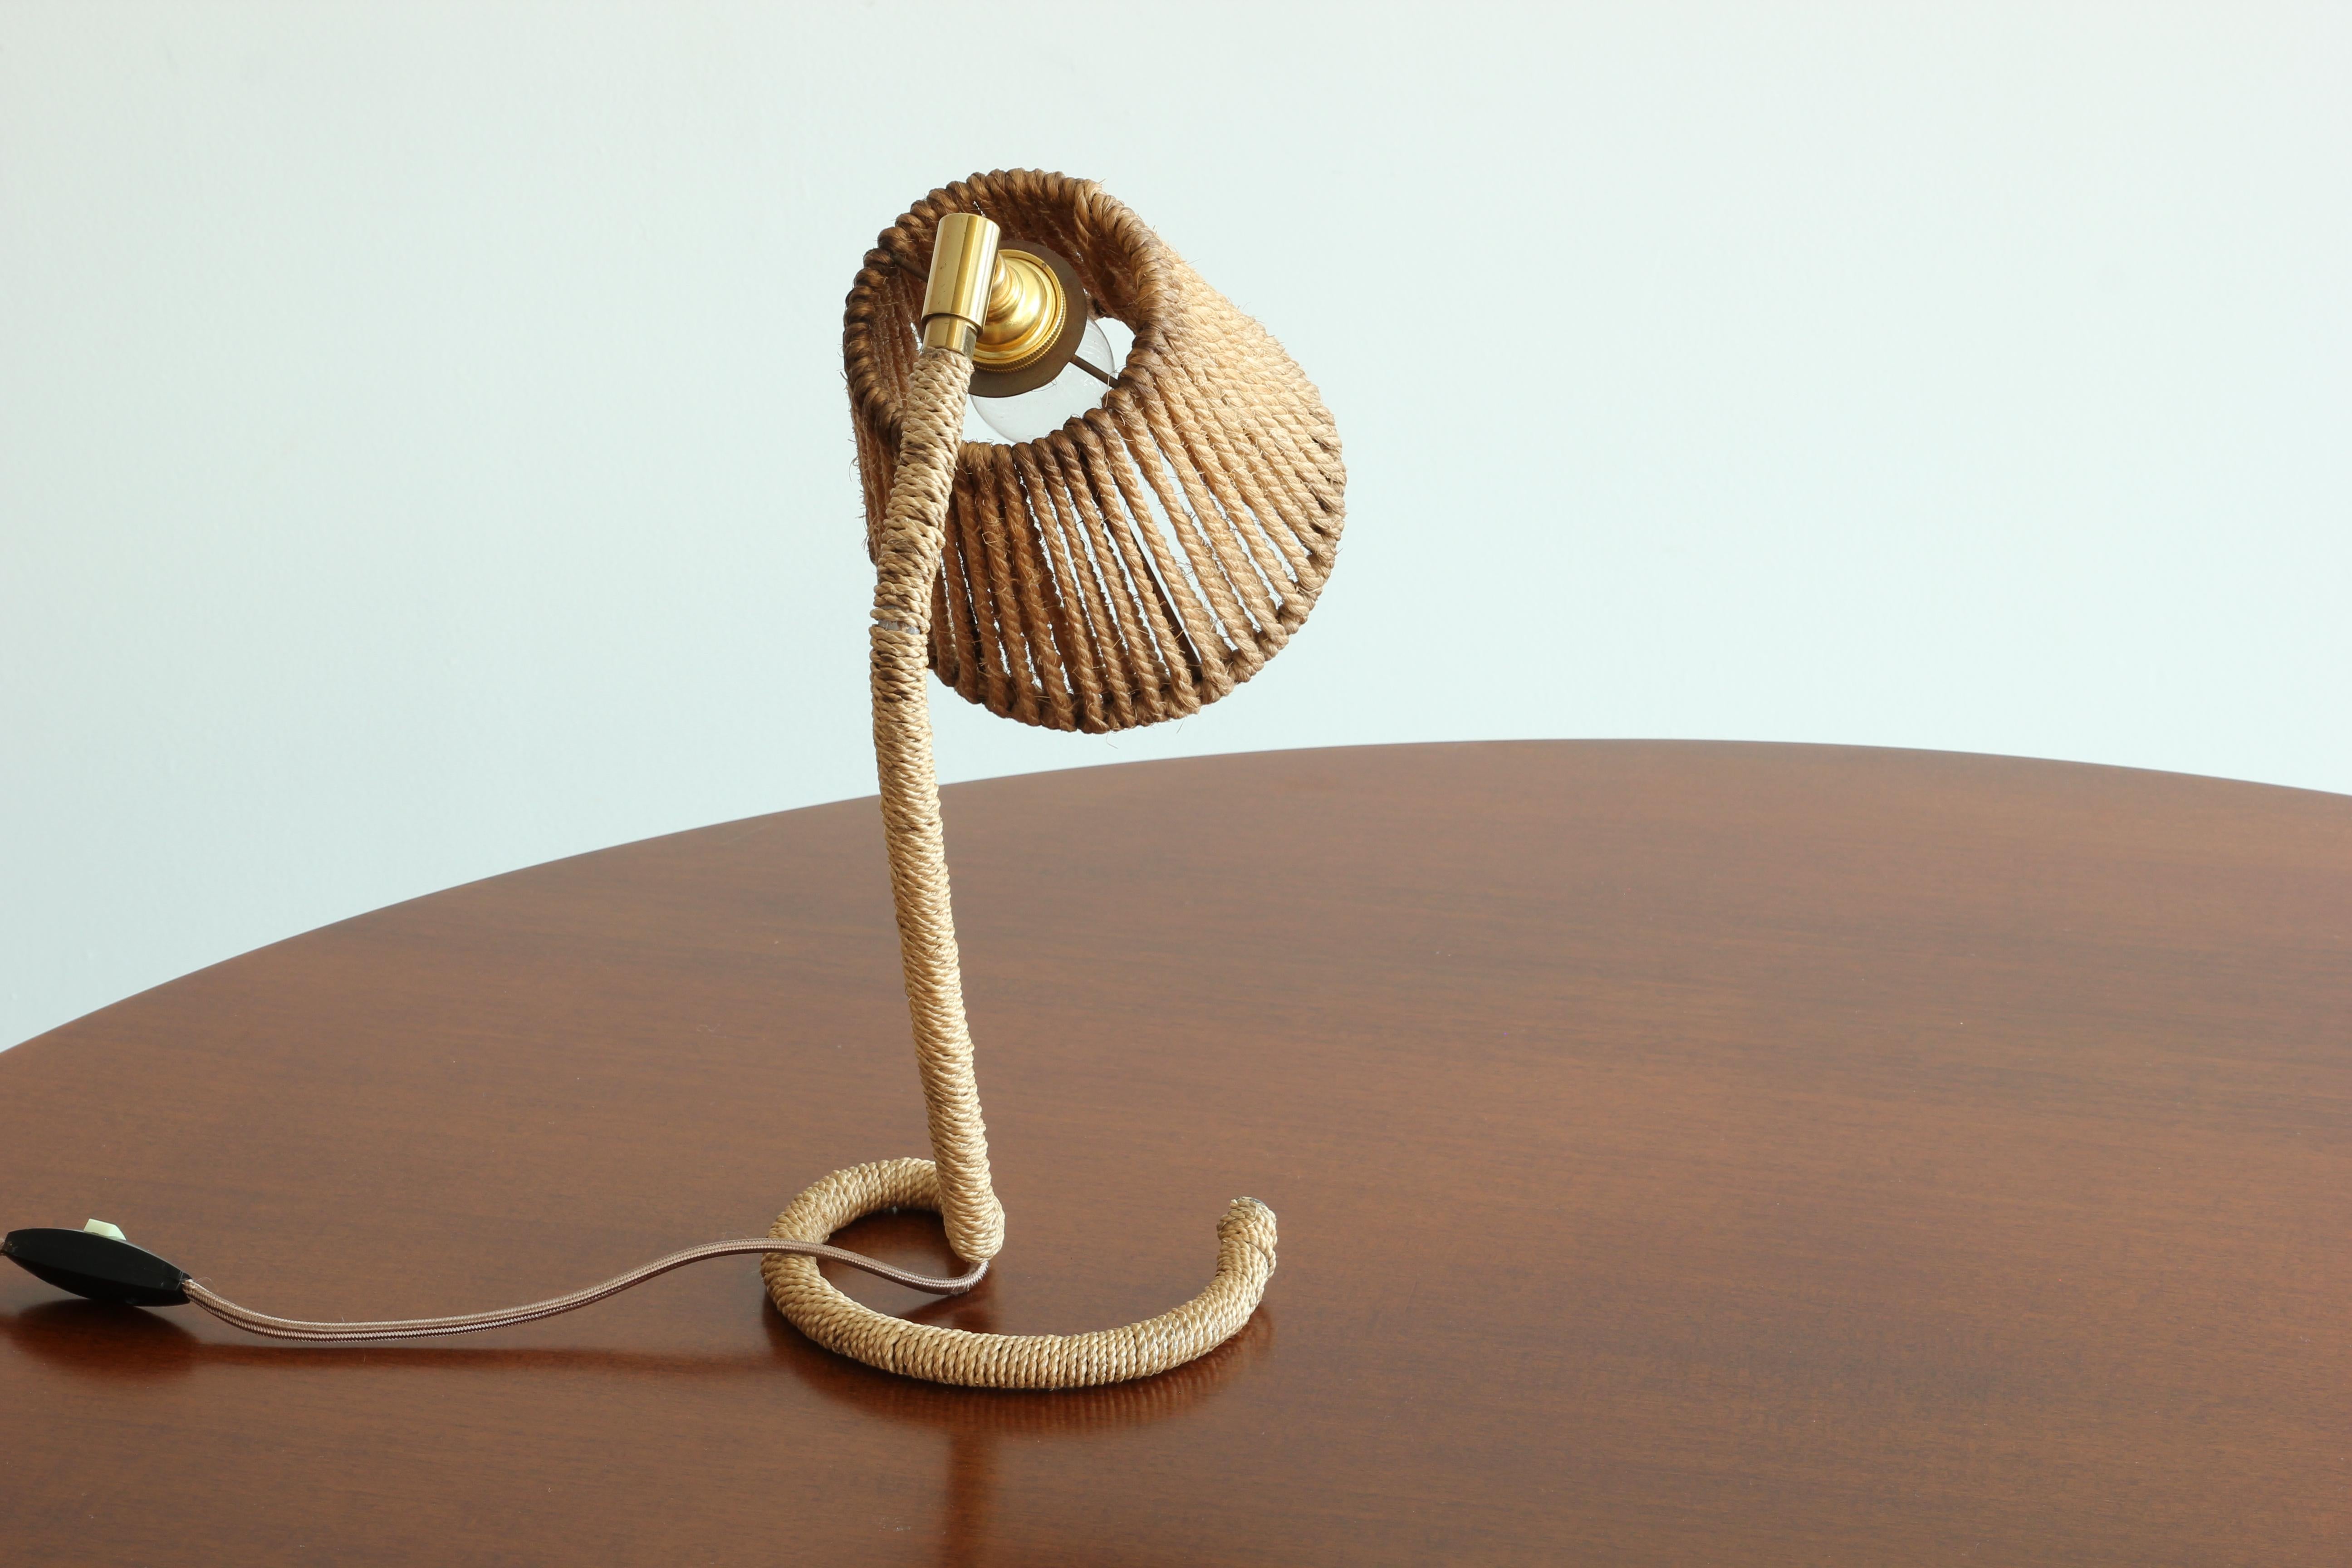 Petite desk light by Audoux Minet, sculptural shape and newly rewired.